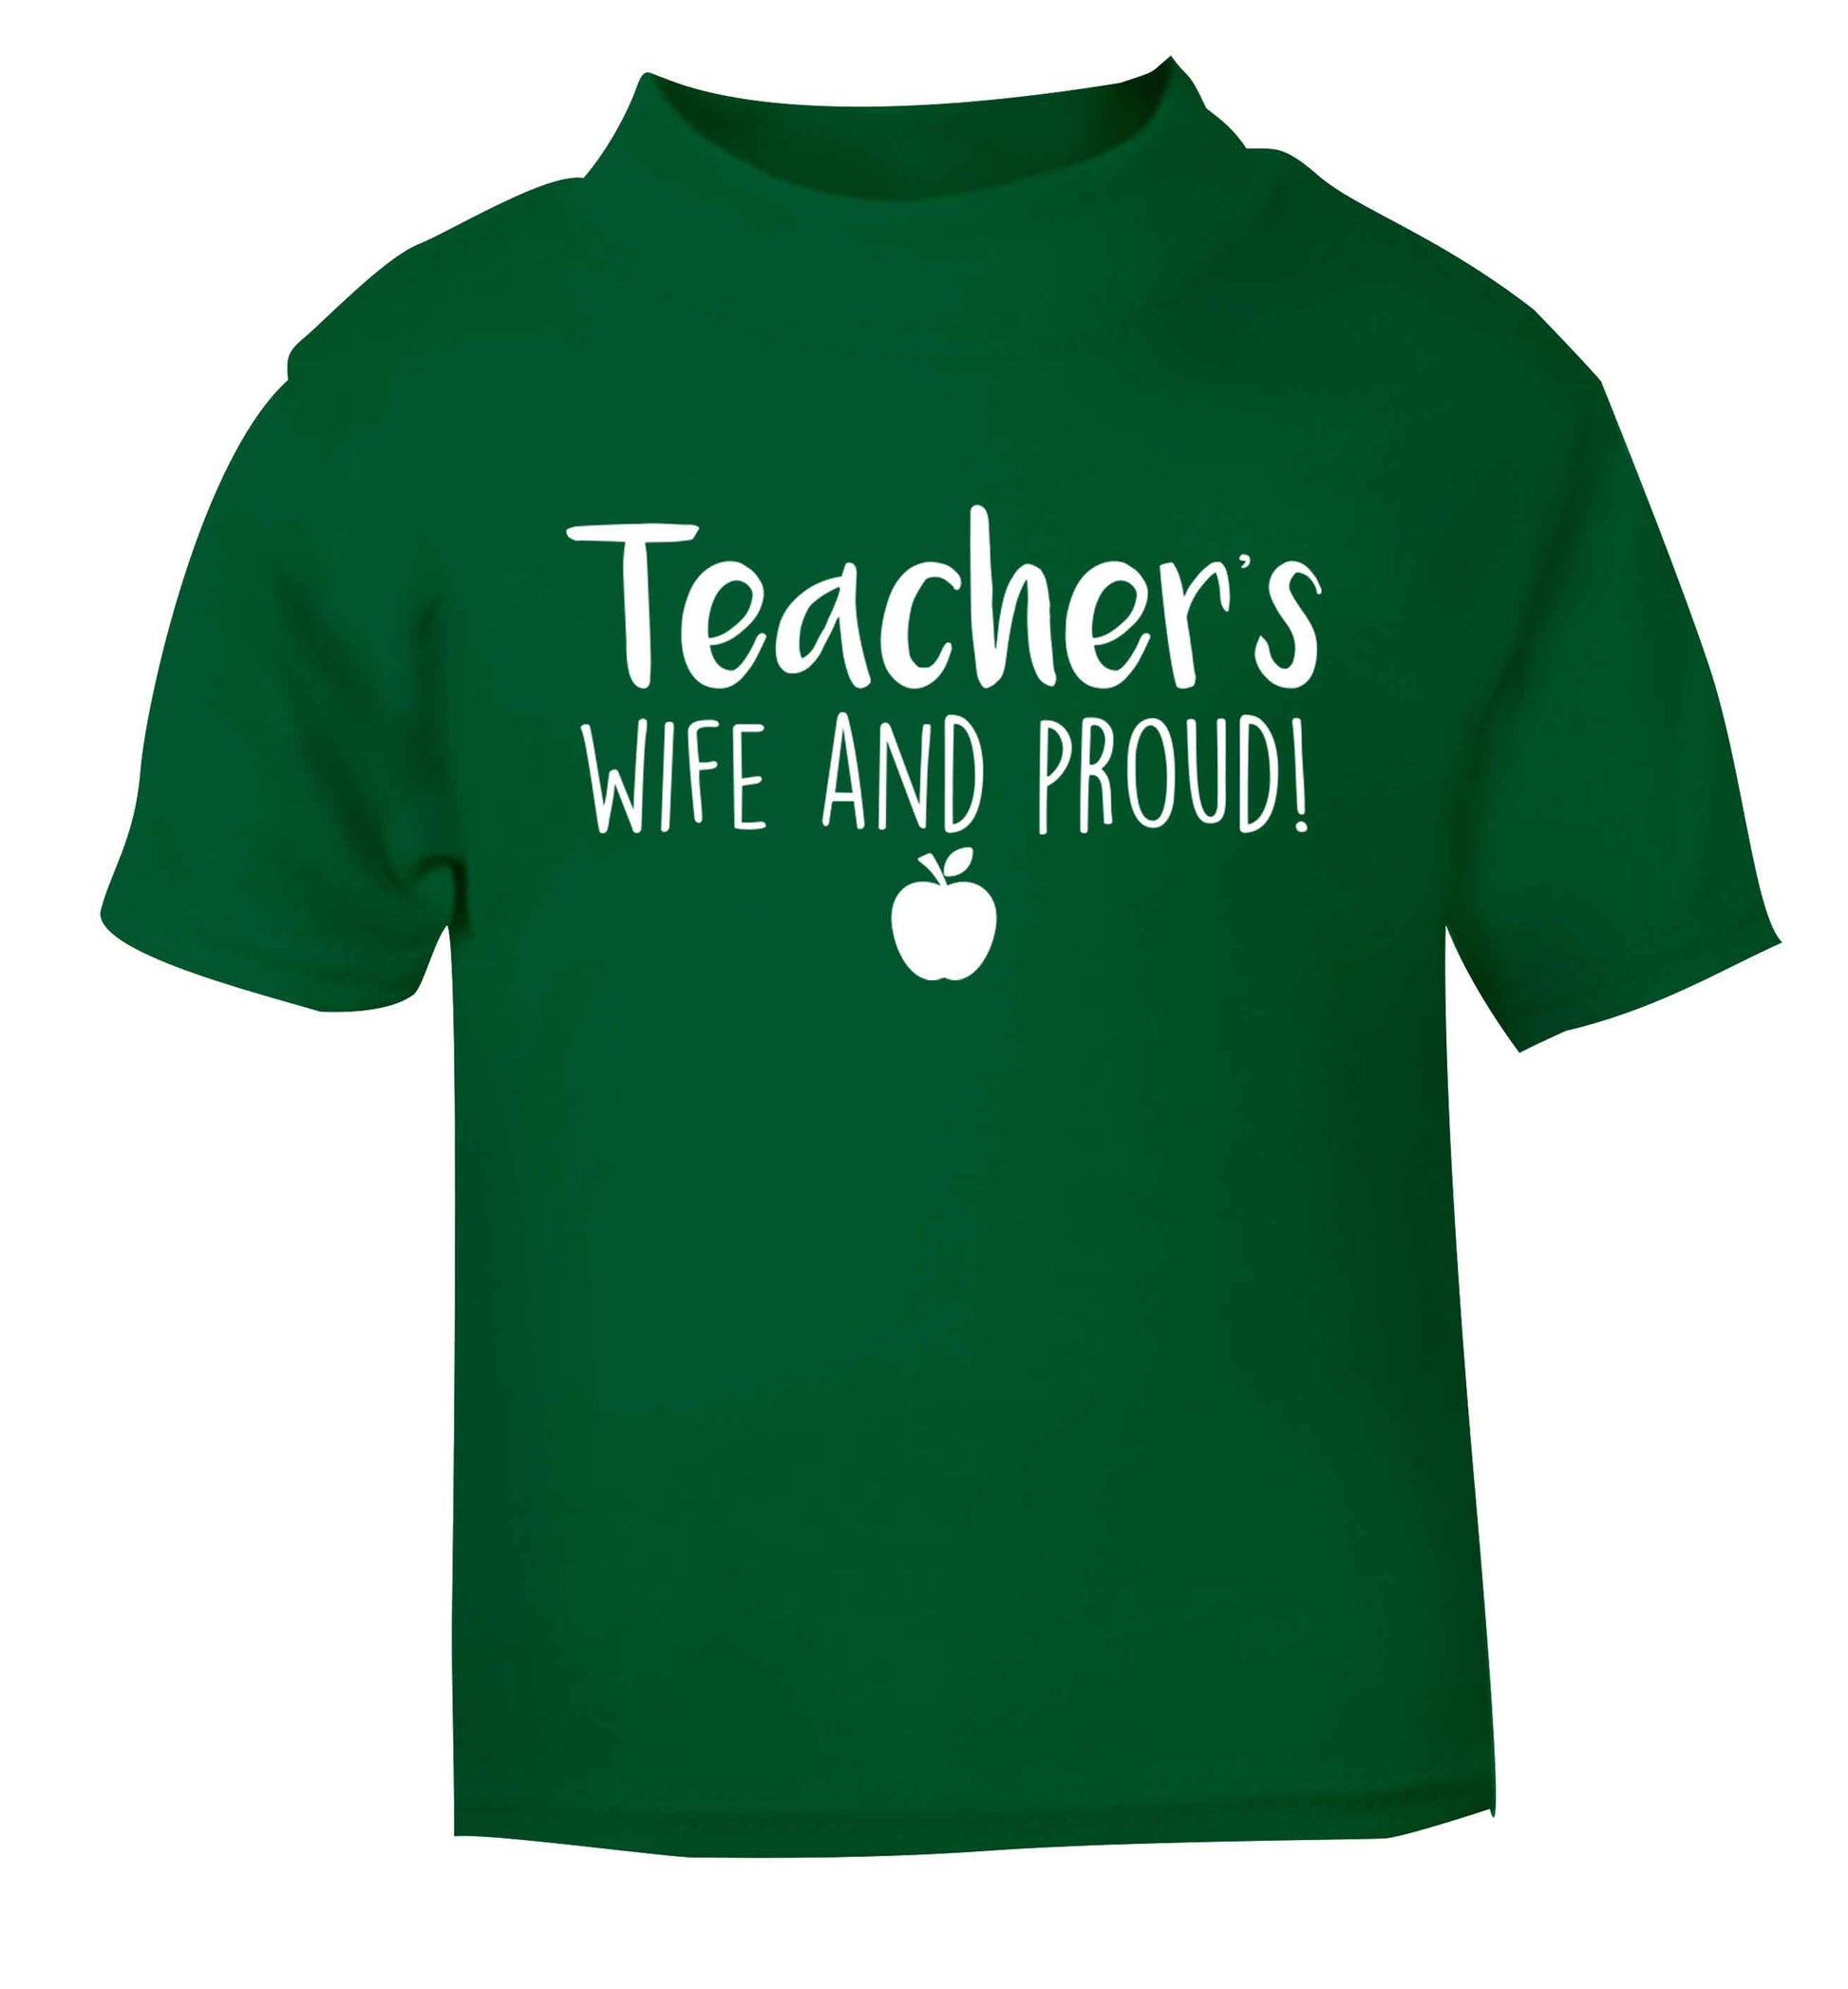 Teachers wife and proud green baby toddler Tshirt 2 Years